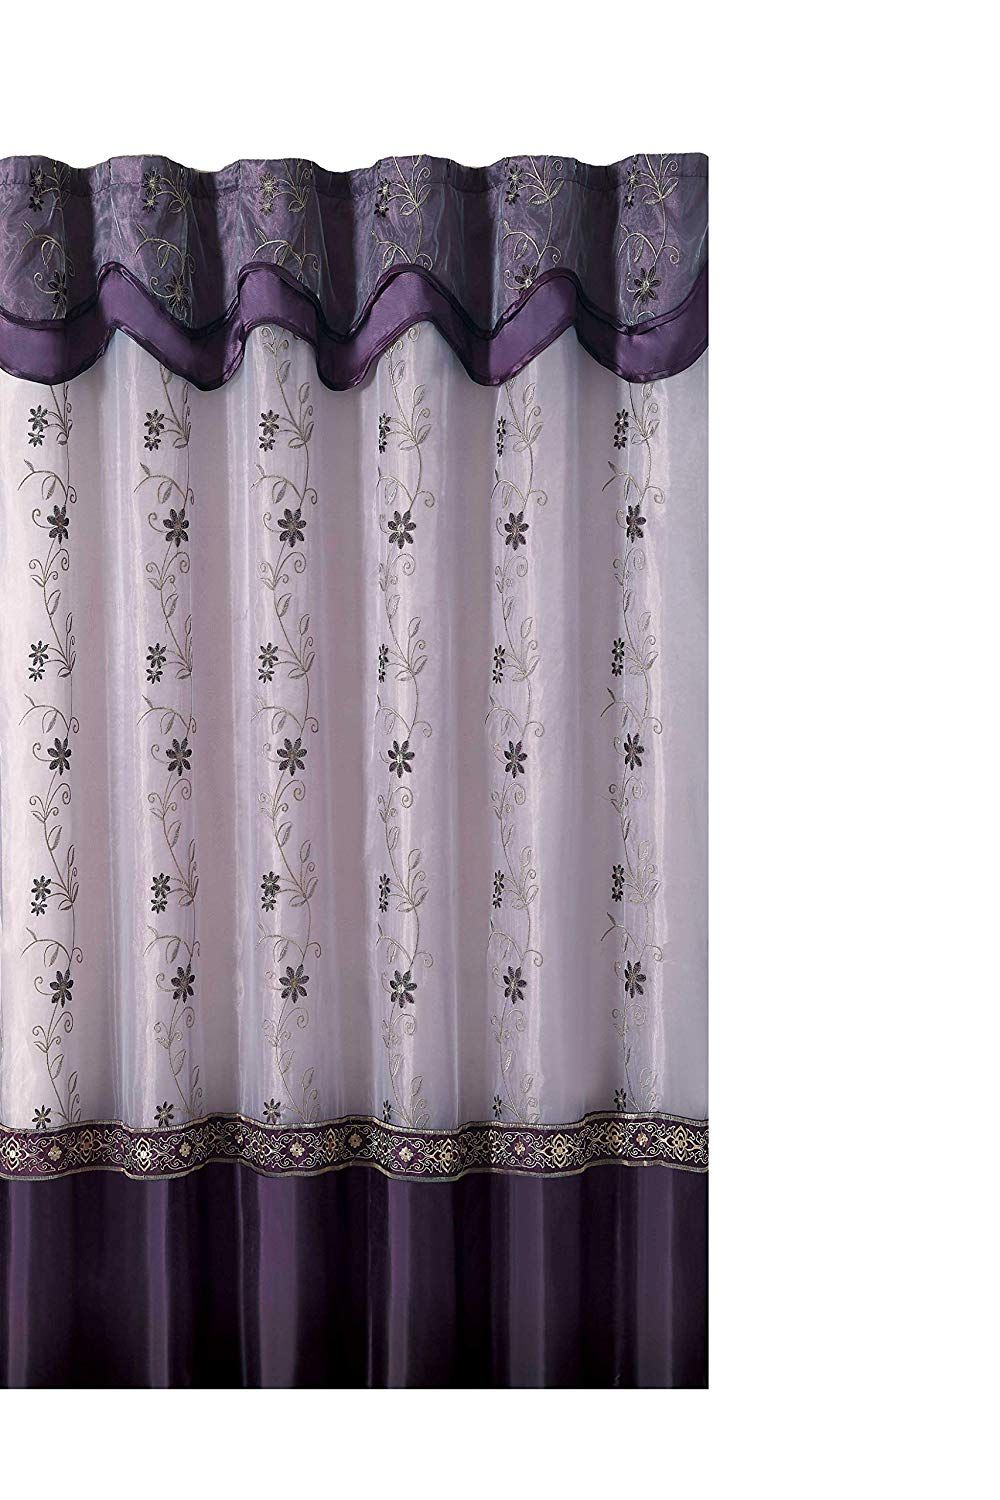 Cheap Sheer Embroidered, Find Sheer Embroidered Deals On With Wavy Leaves Embroidered Sheer Extra Wide Grommet Curtain Panels (View 27 of 30)